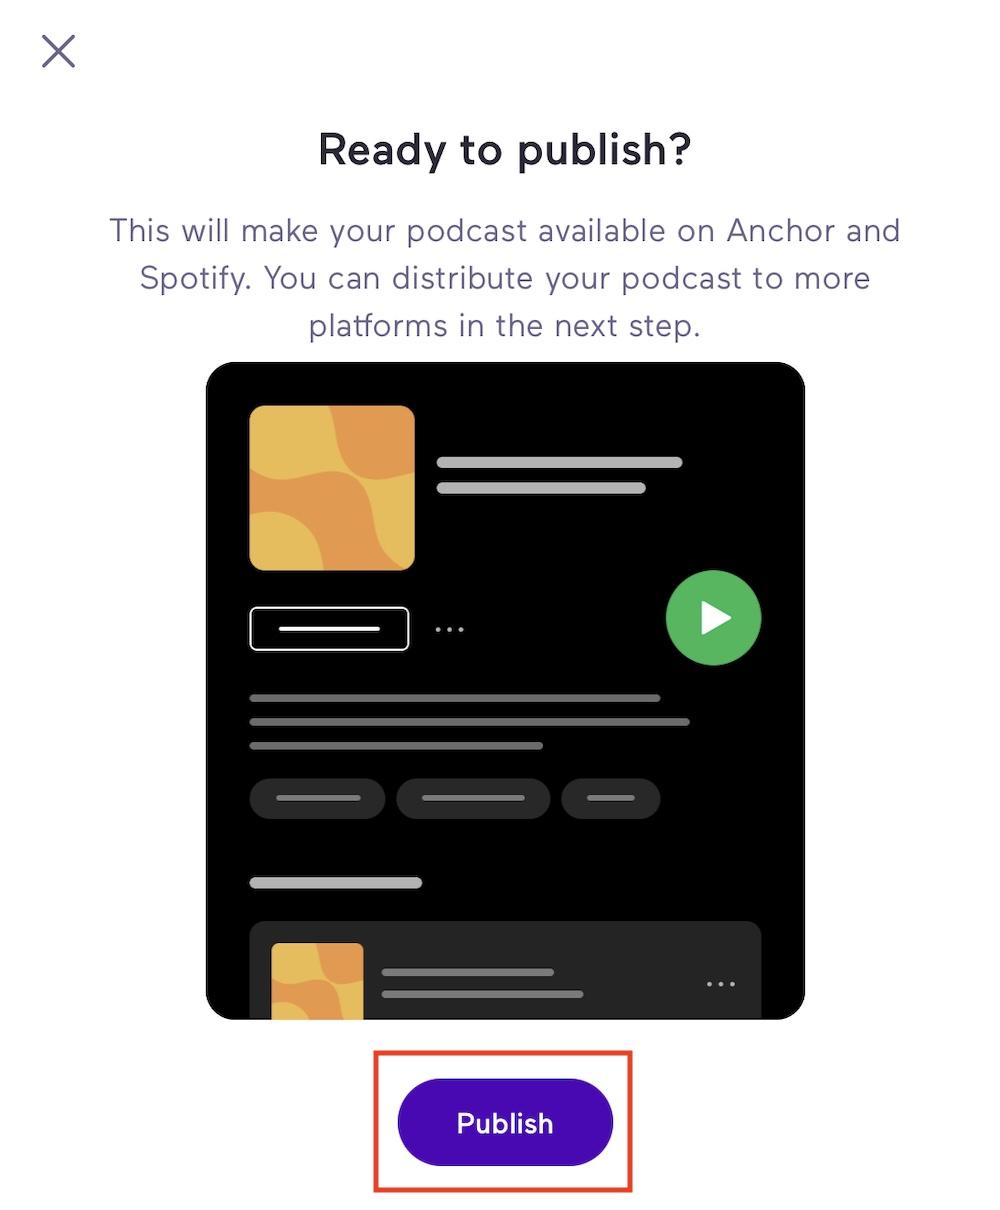 Publishing a podcast on Anchor